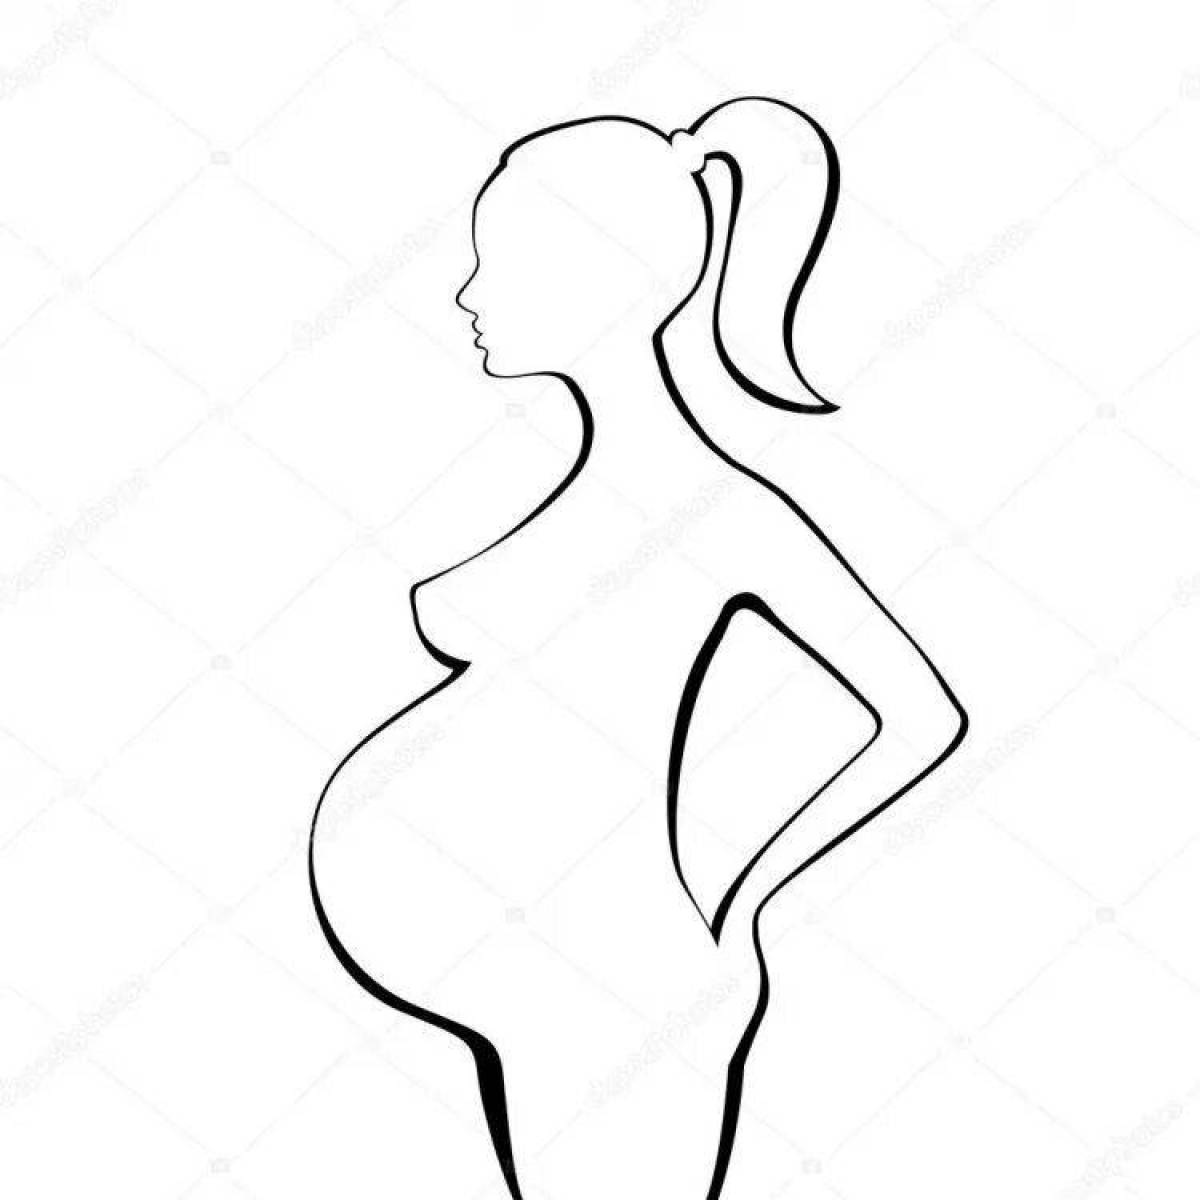 Coloring page of a joyful pregnant woman